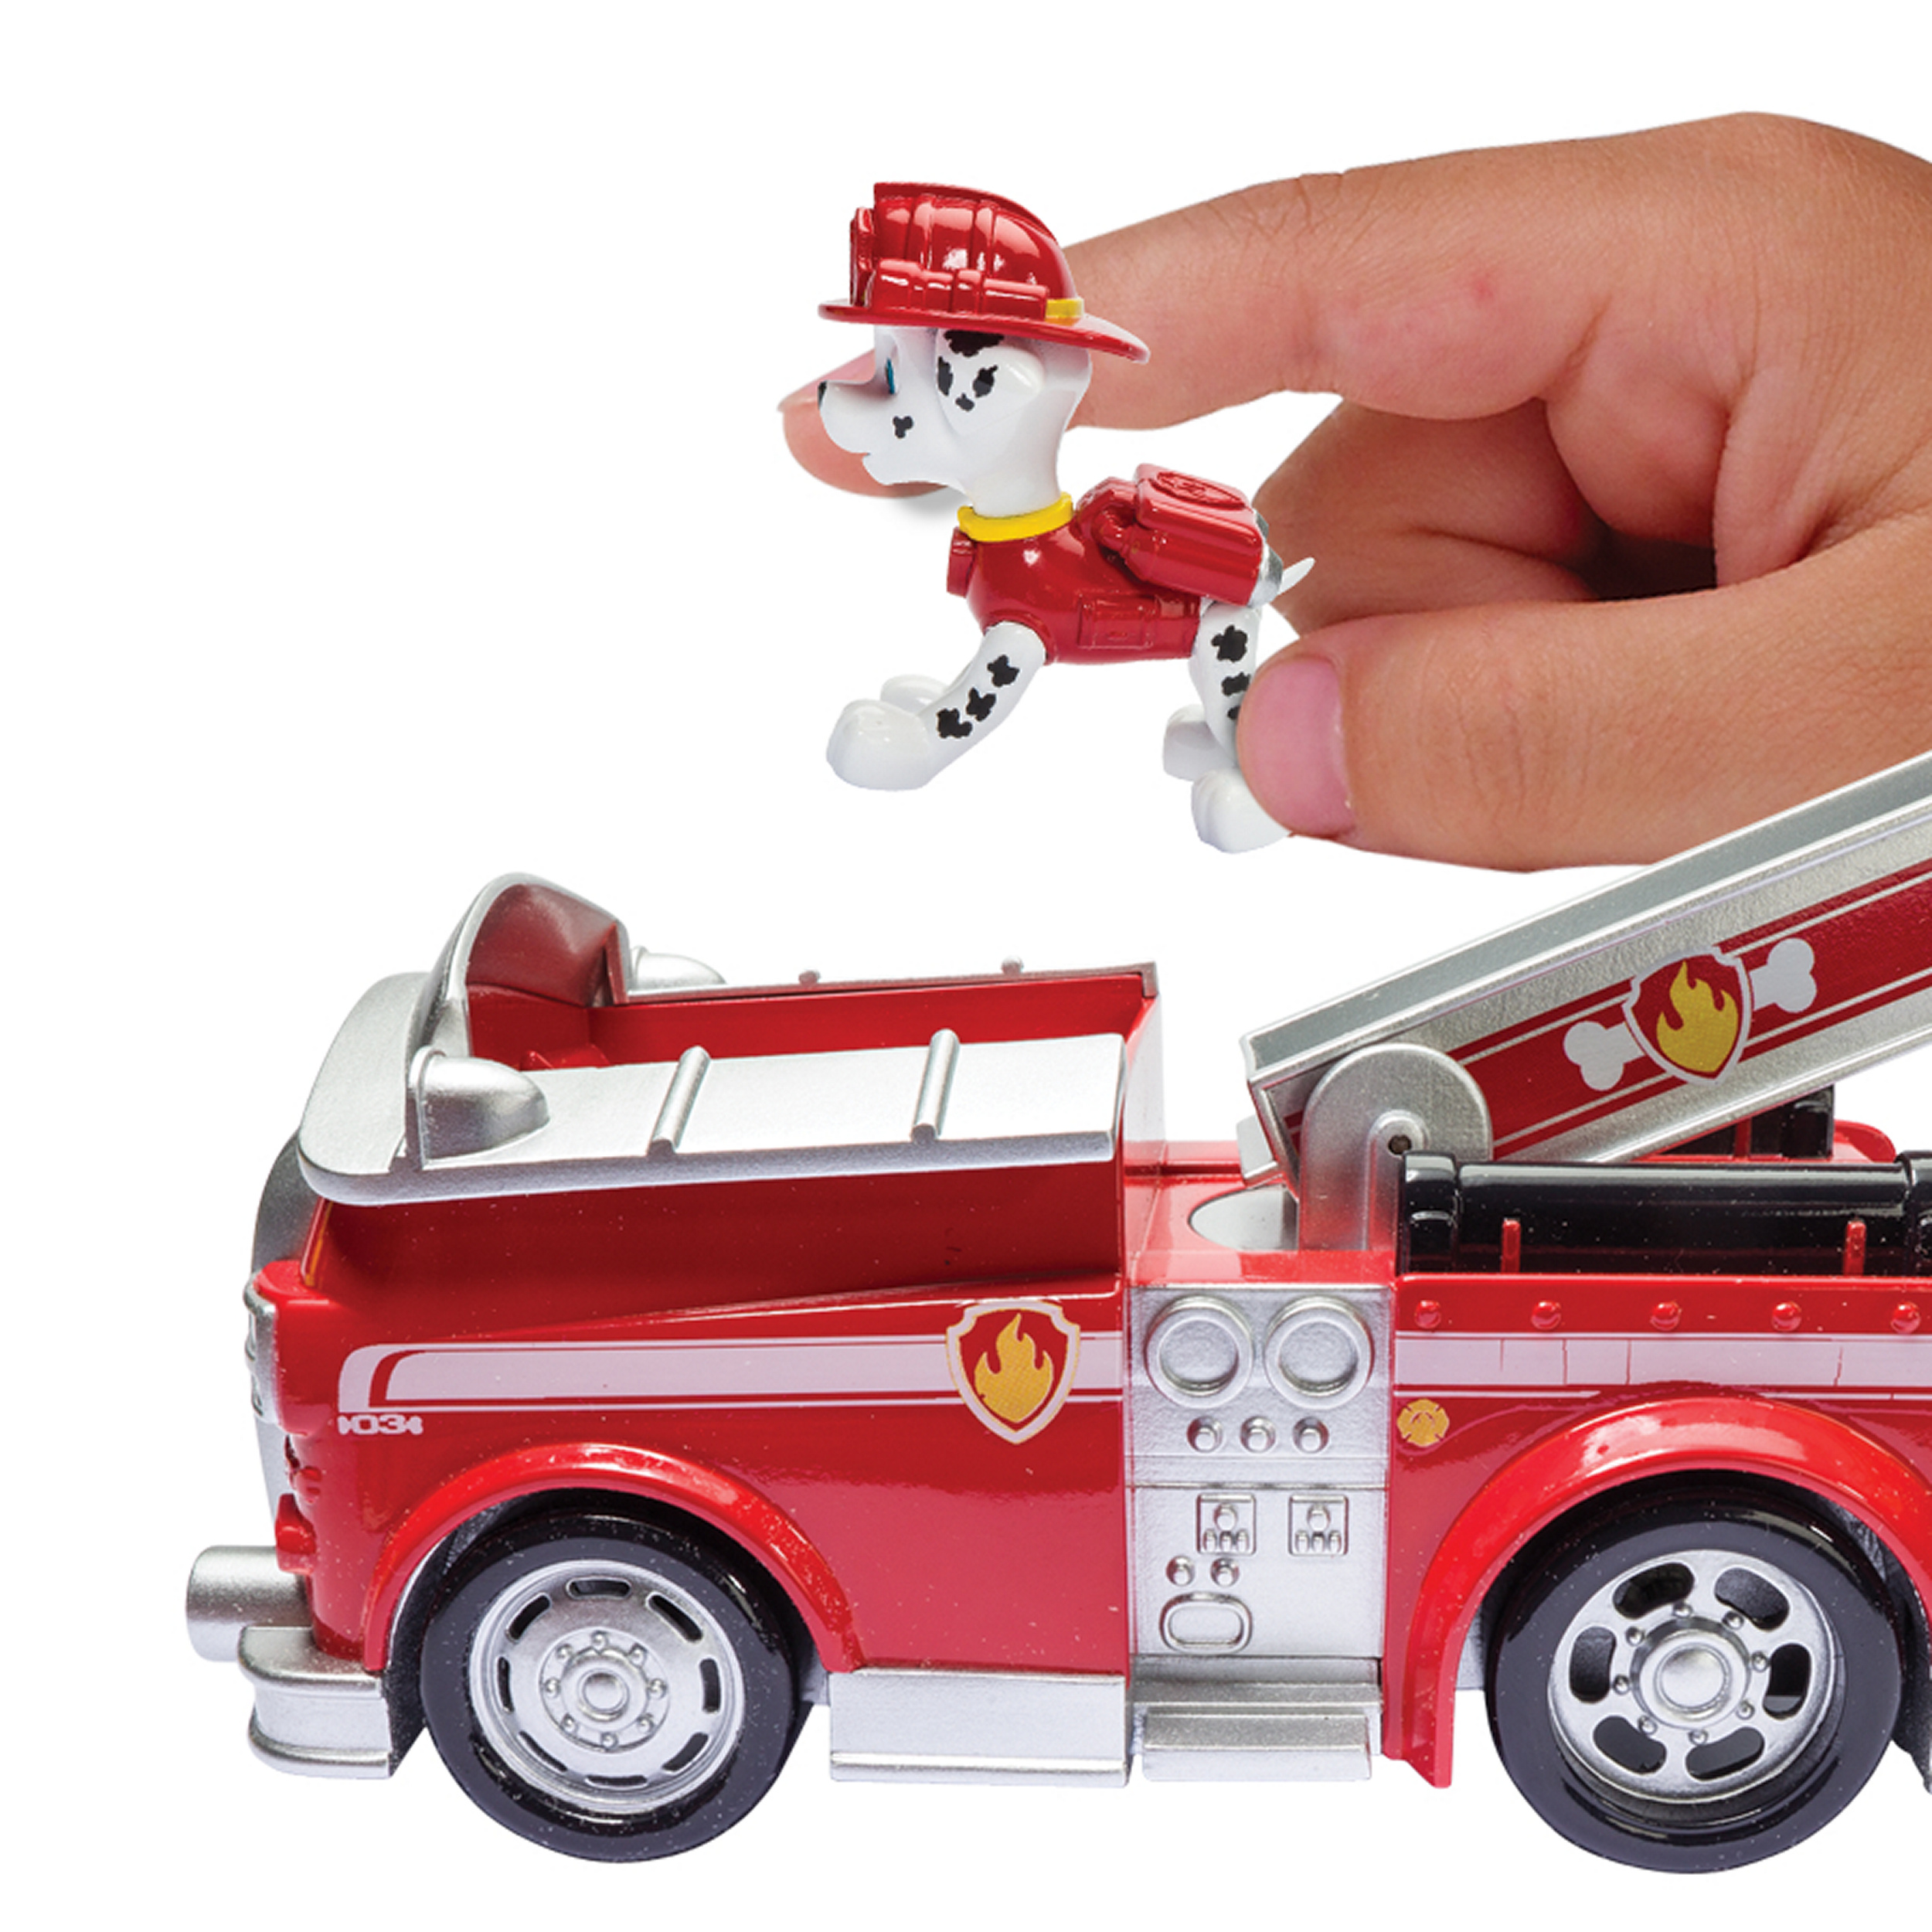 Paw Patrol Marshall's Fire Fightin' Truck, Vehicle and Figure - image 4 of 6